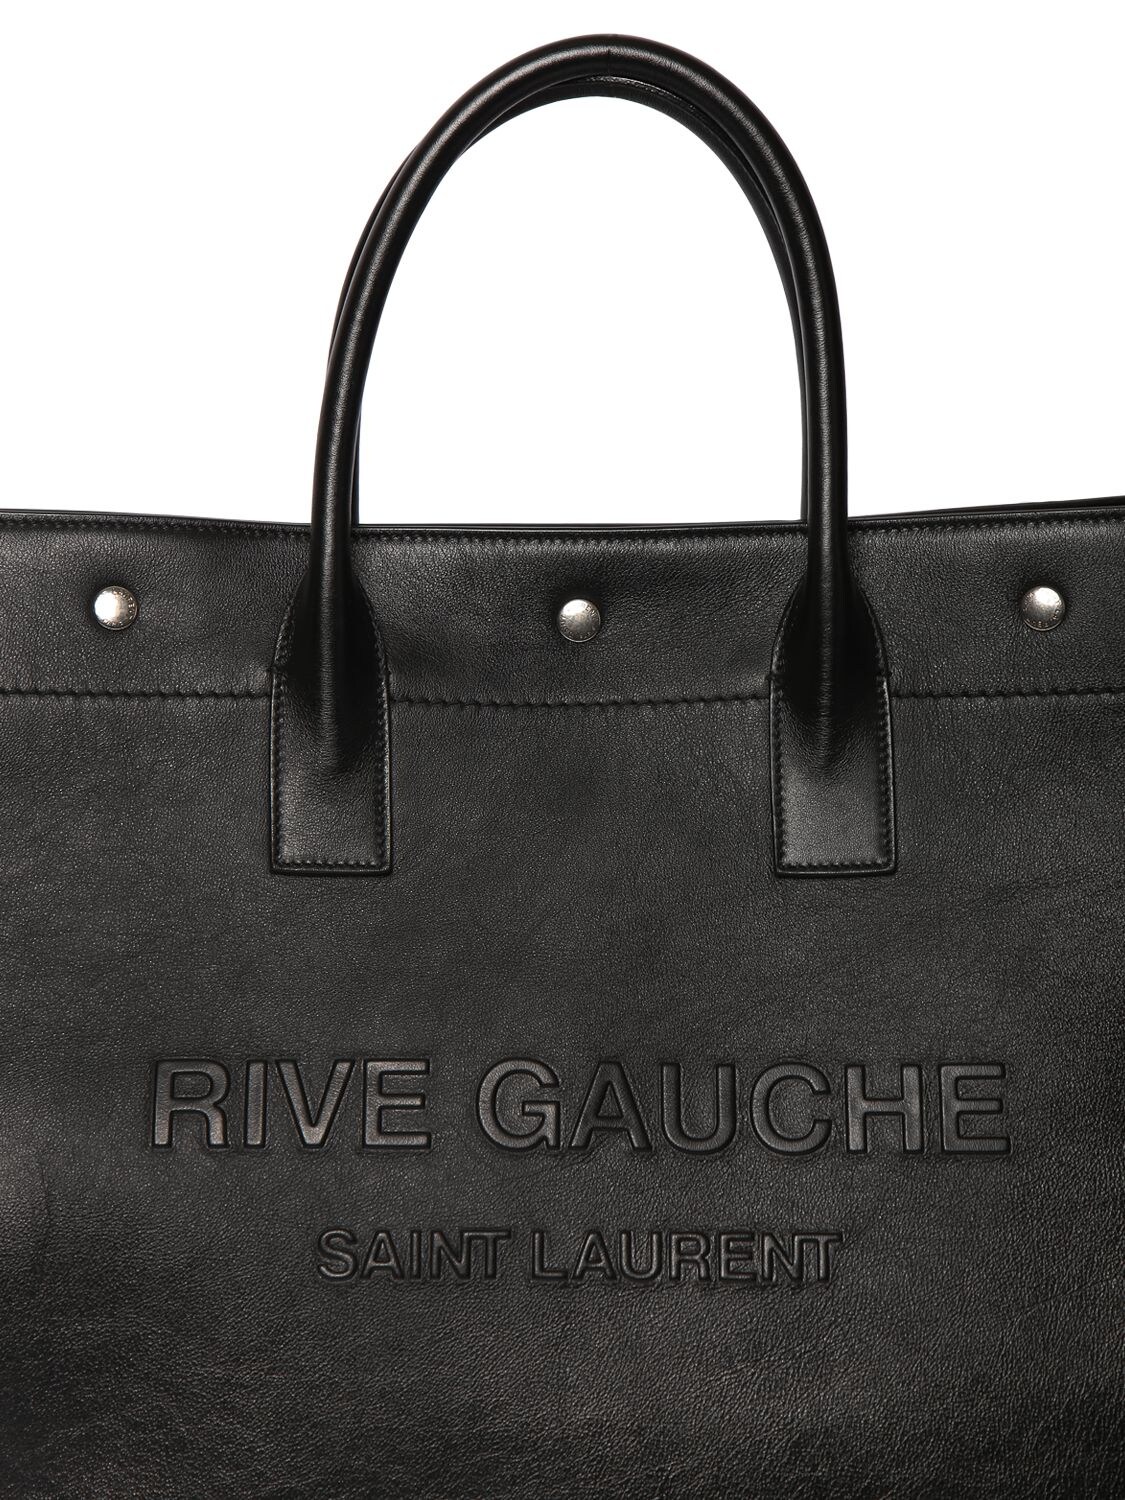 Saint Laurent Shopping N/S leather tote bag